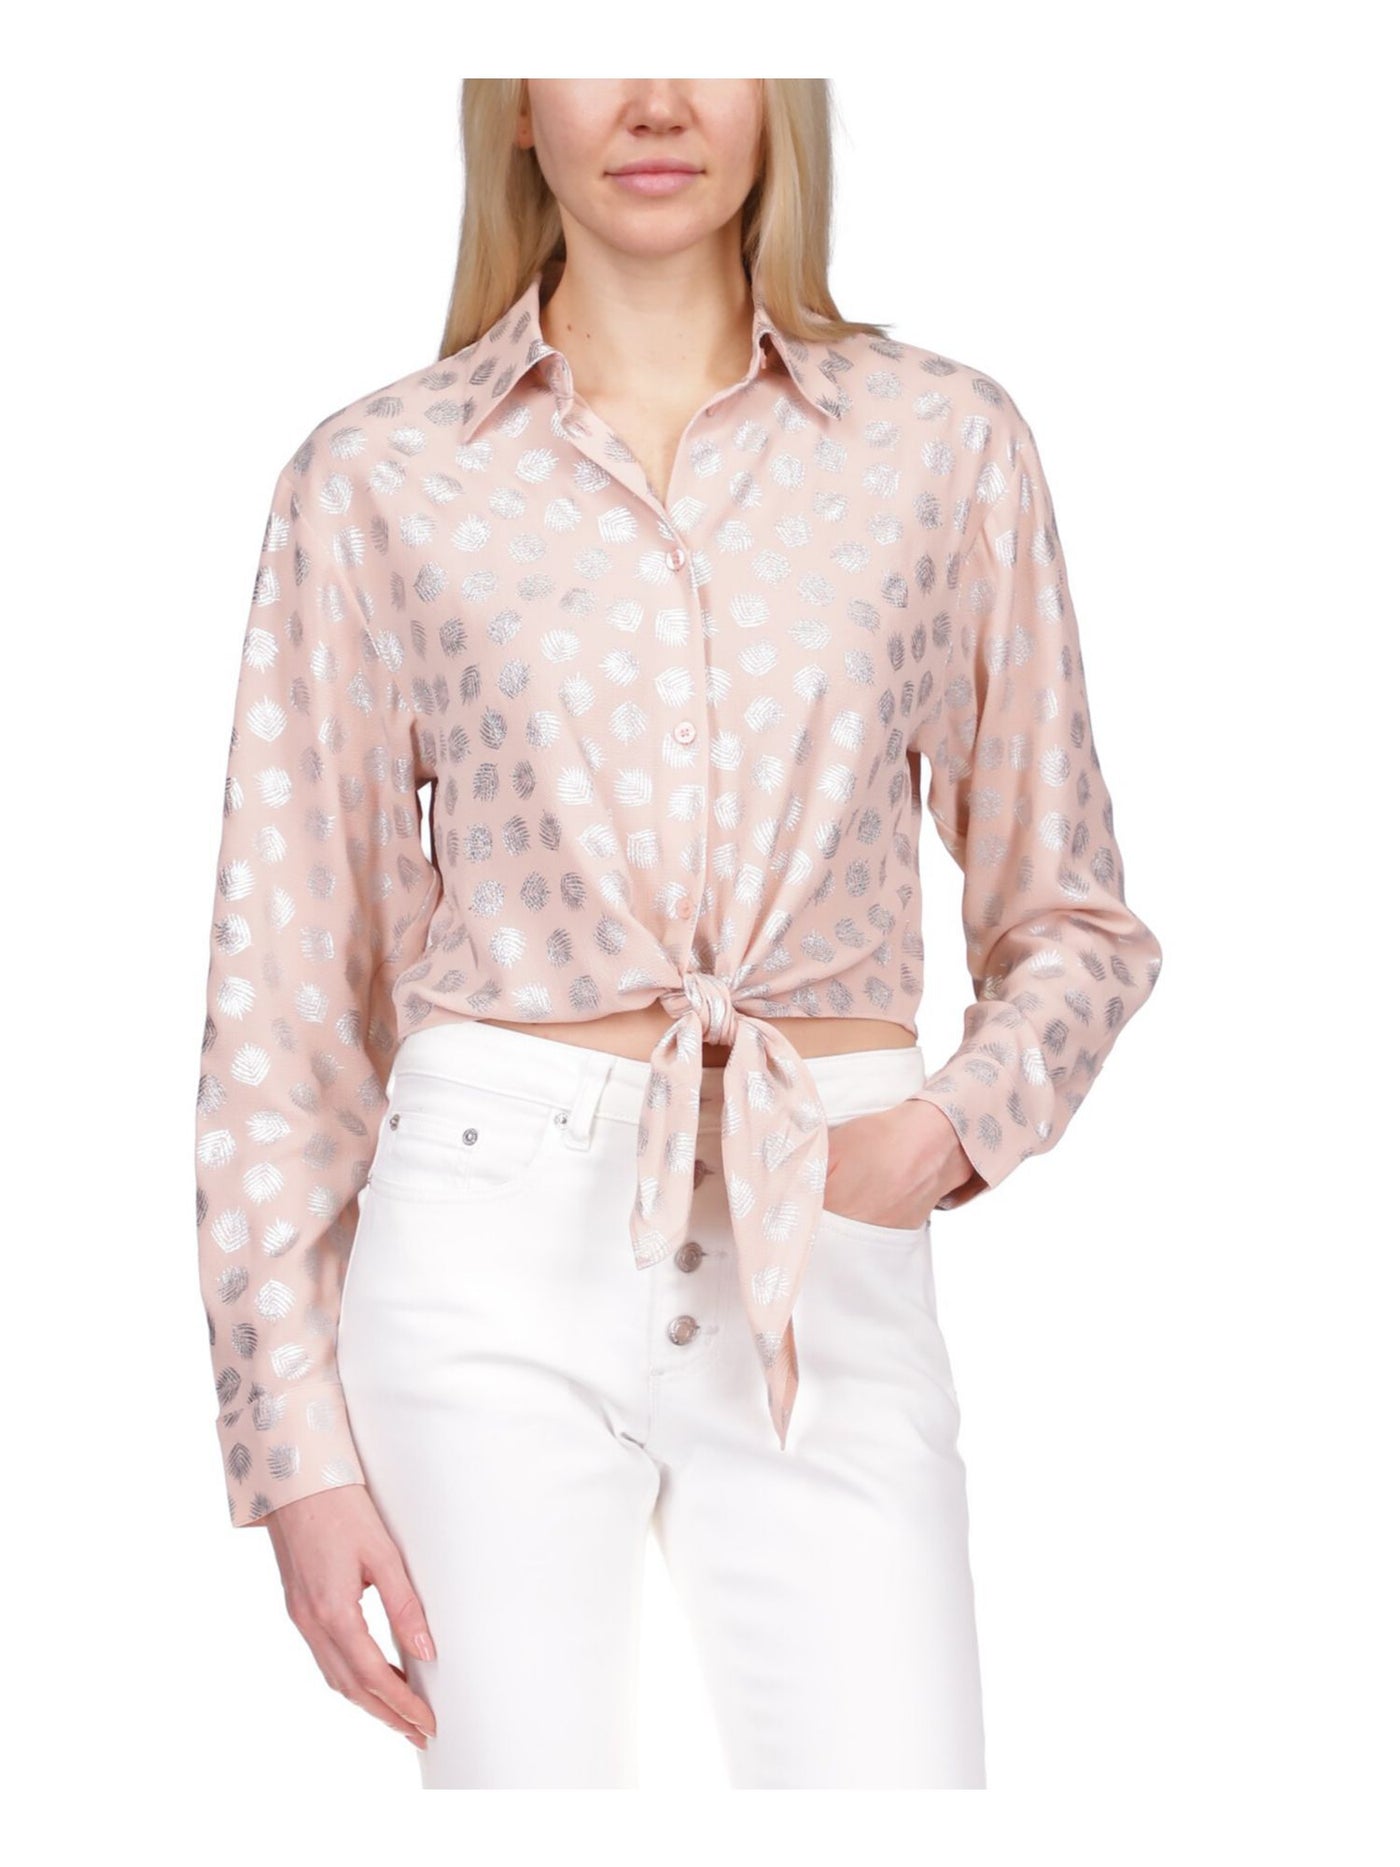 MICHAEL KORS Womens Pink Short Length Tie Hem Unlined Printed Cuffed Sleeve Collared Button Up Top M